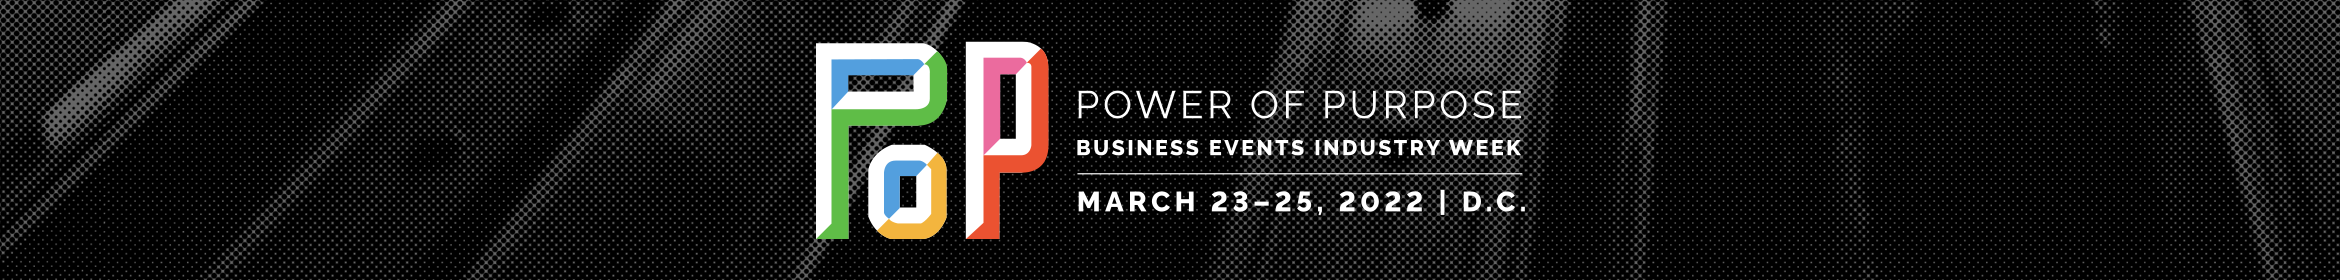 POP: Business Events Industry Week 2022 Main banner